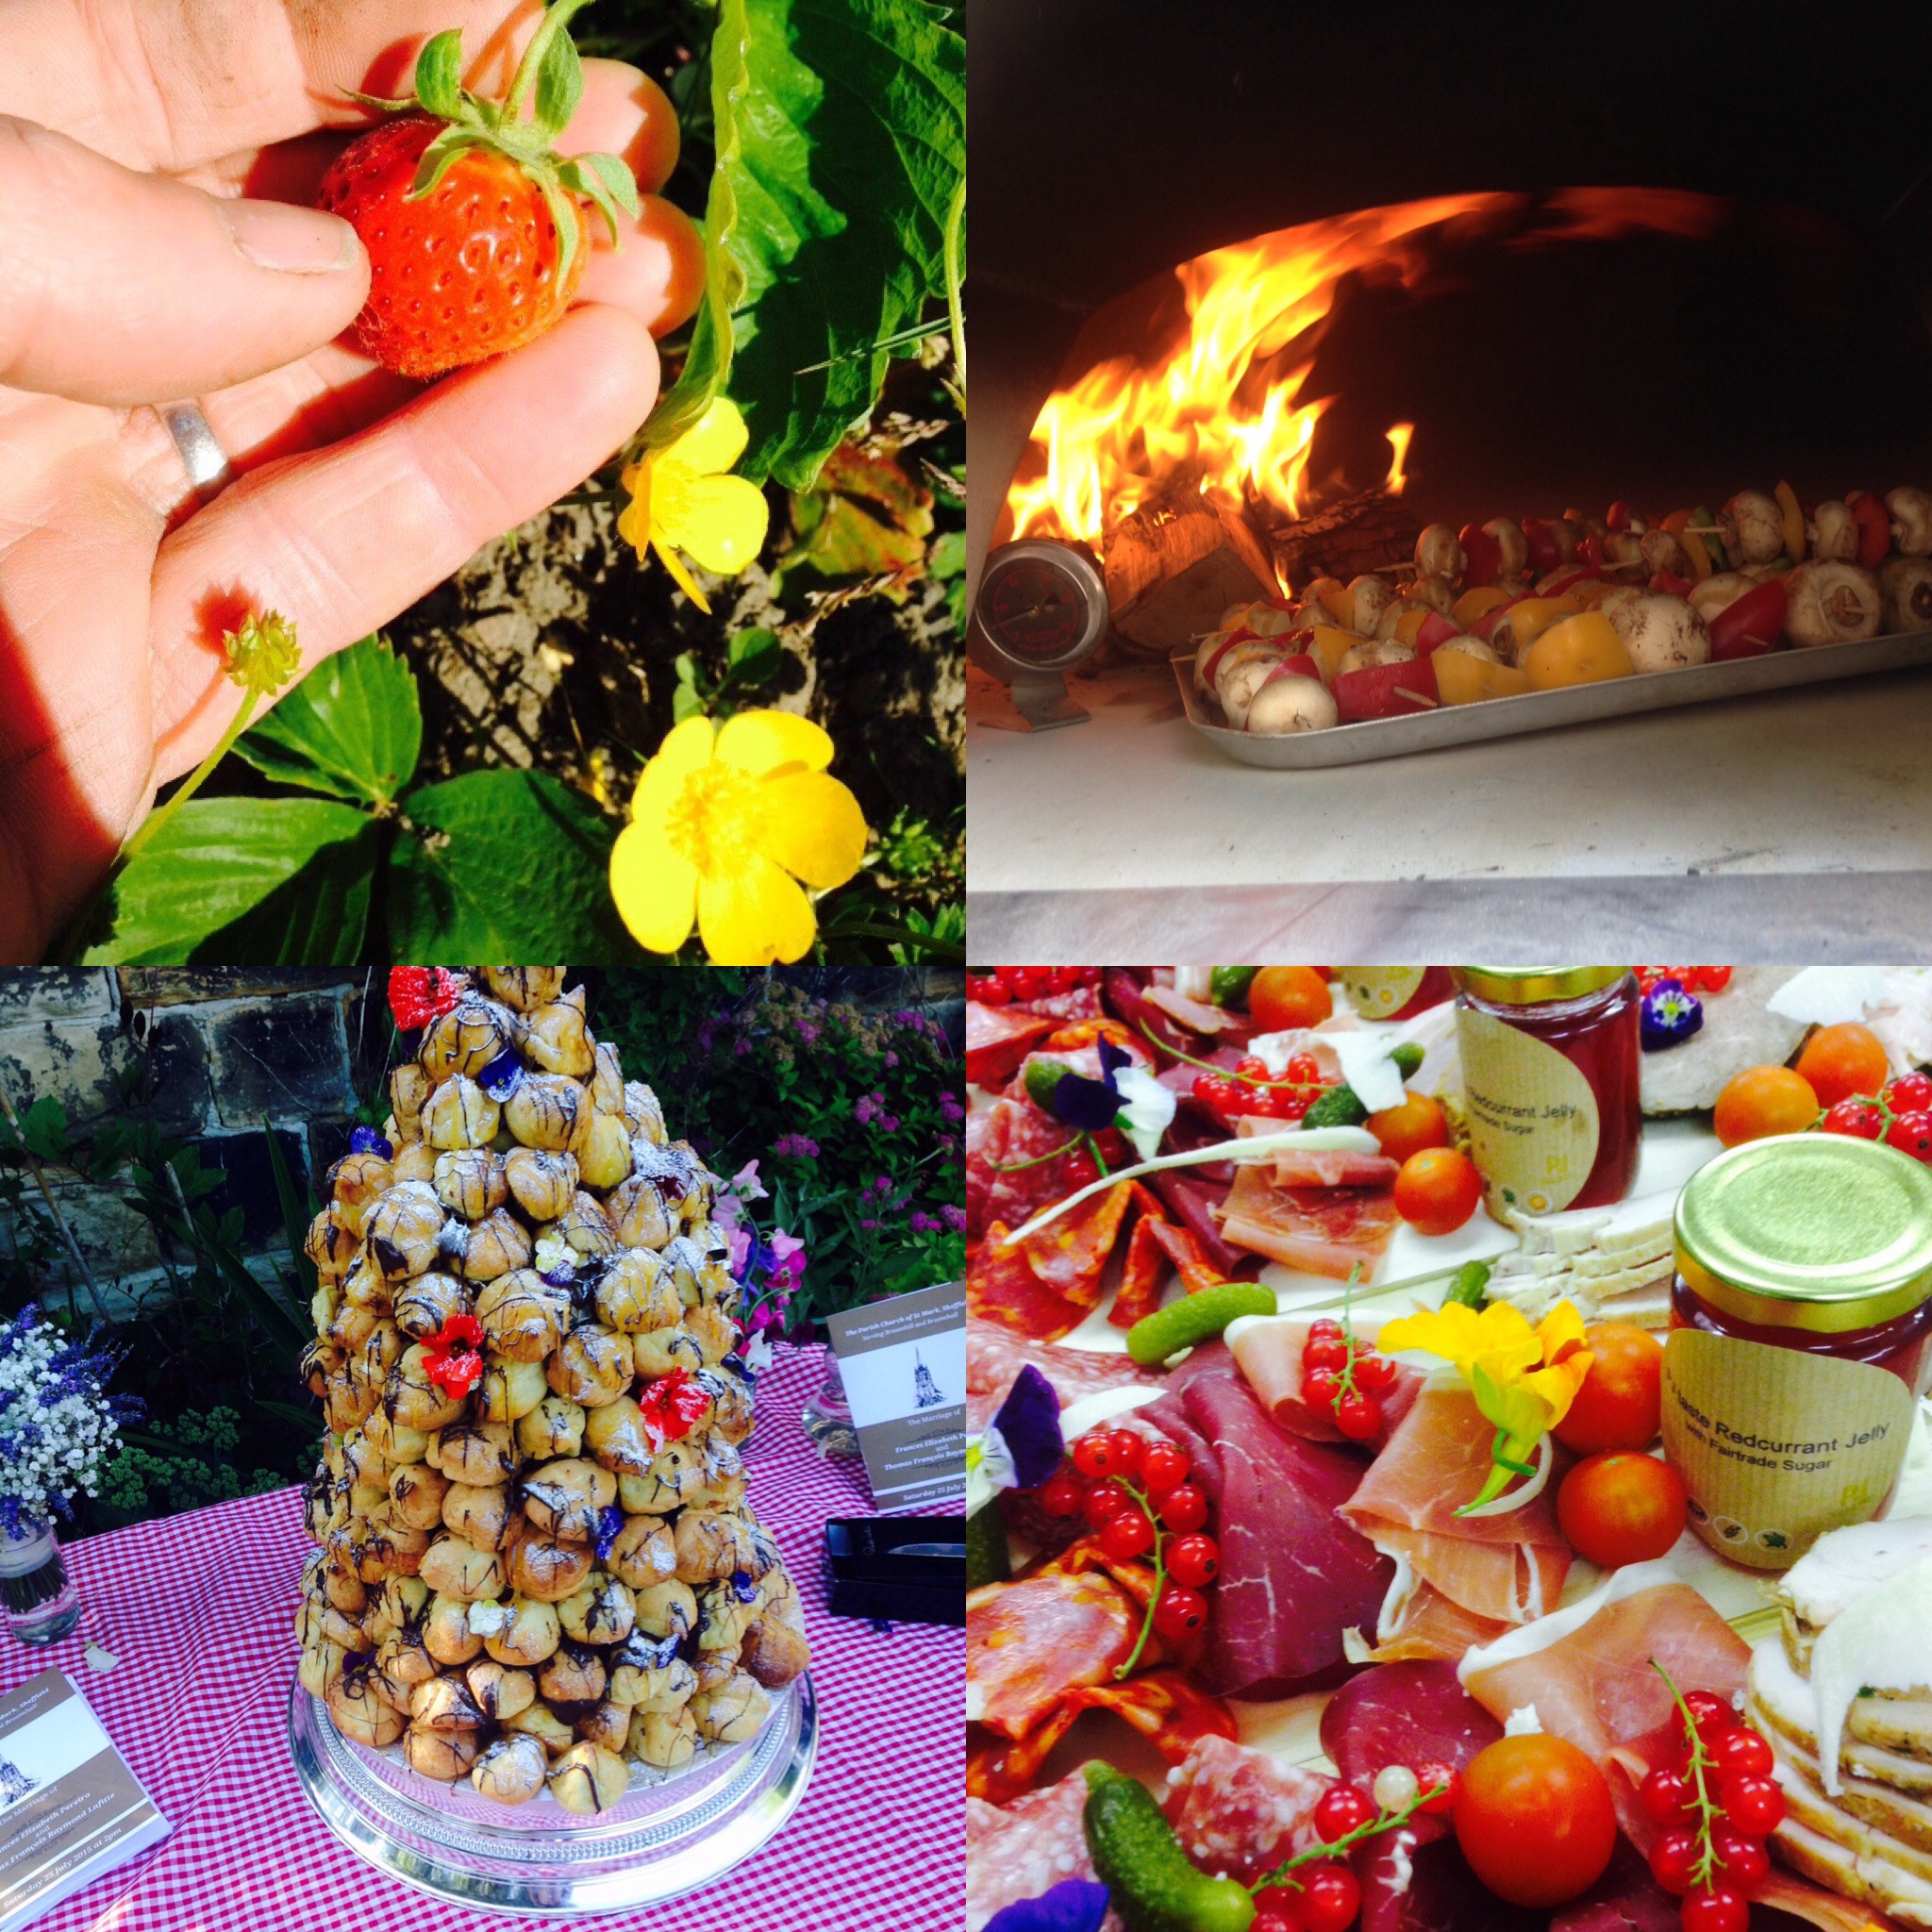 Croque en bouchee, meat platters, pizza oven and strawberry picking with PJ taste